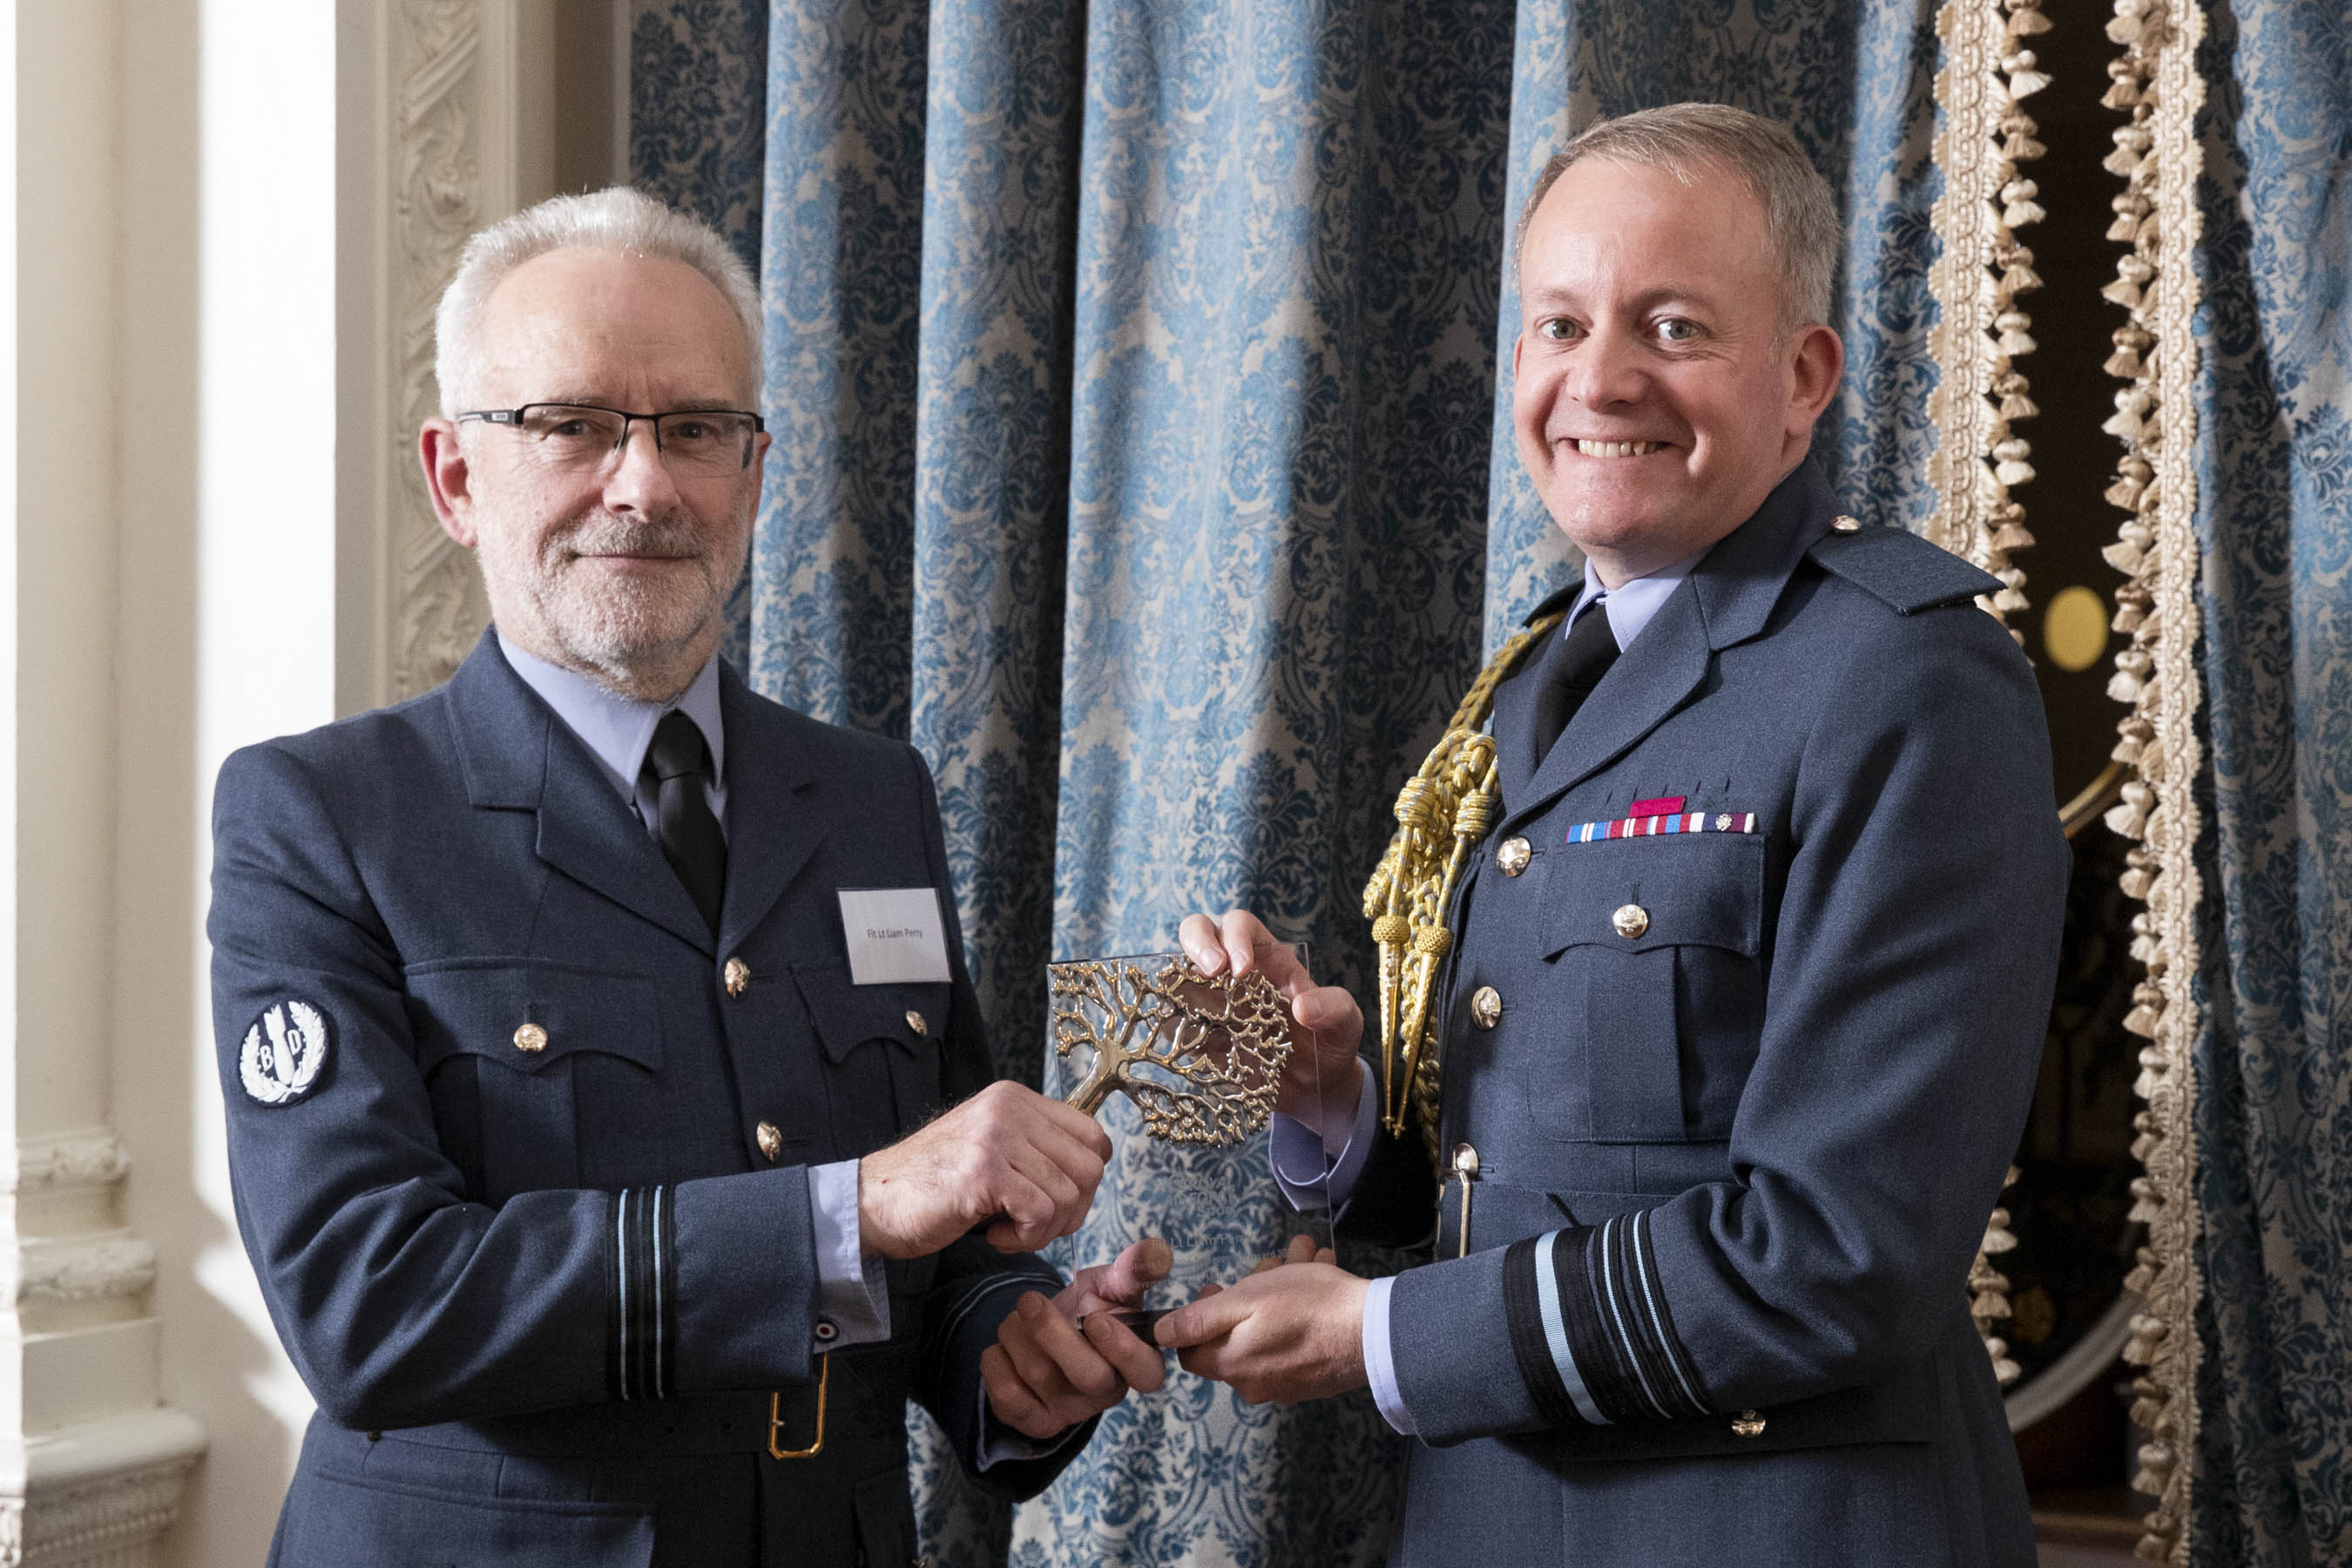 Image shows RAF personnel holding glass award.